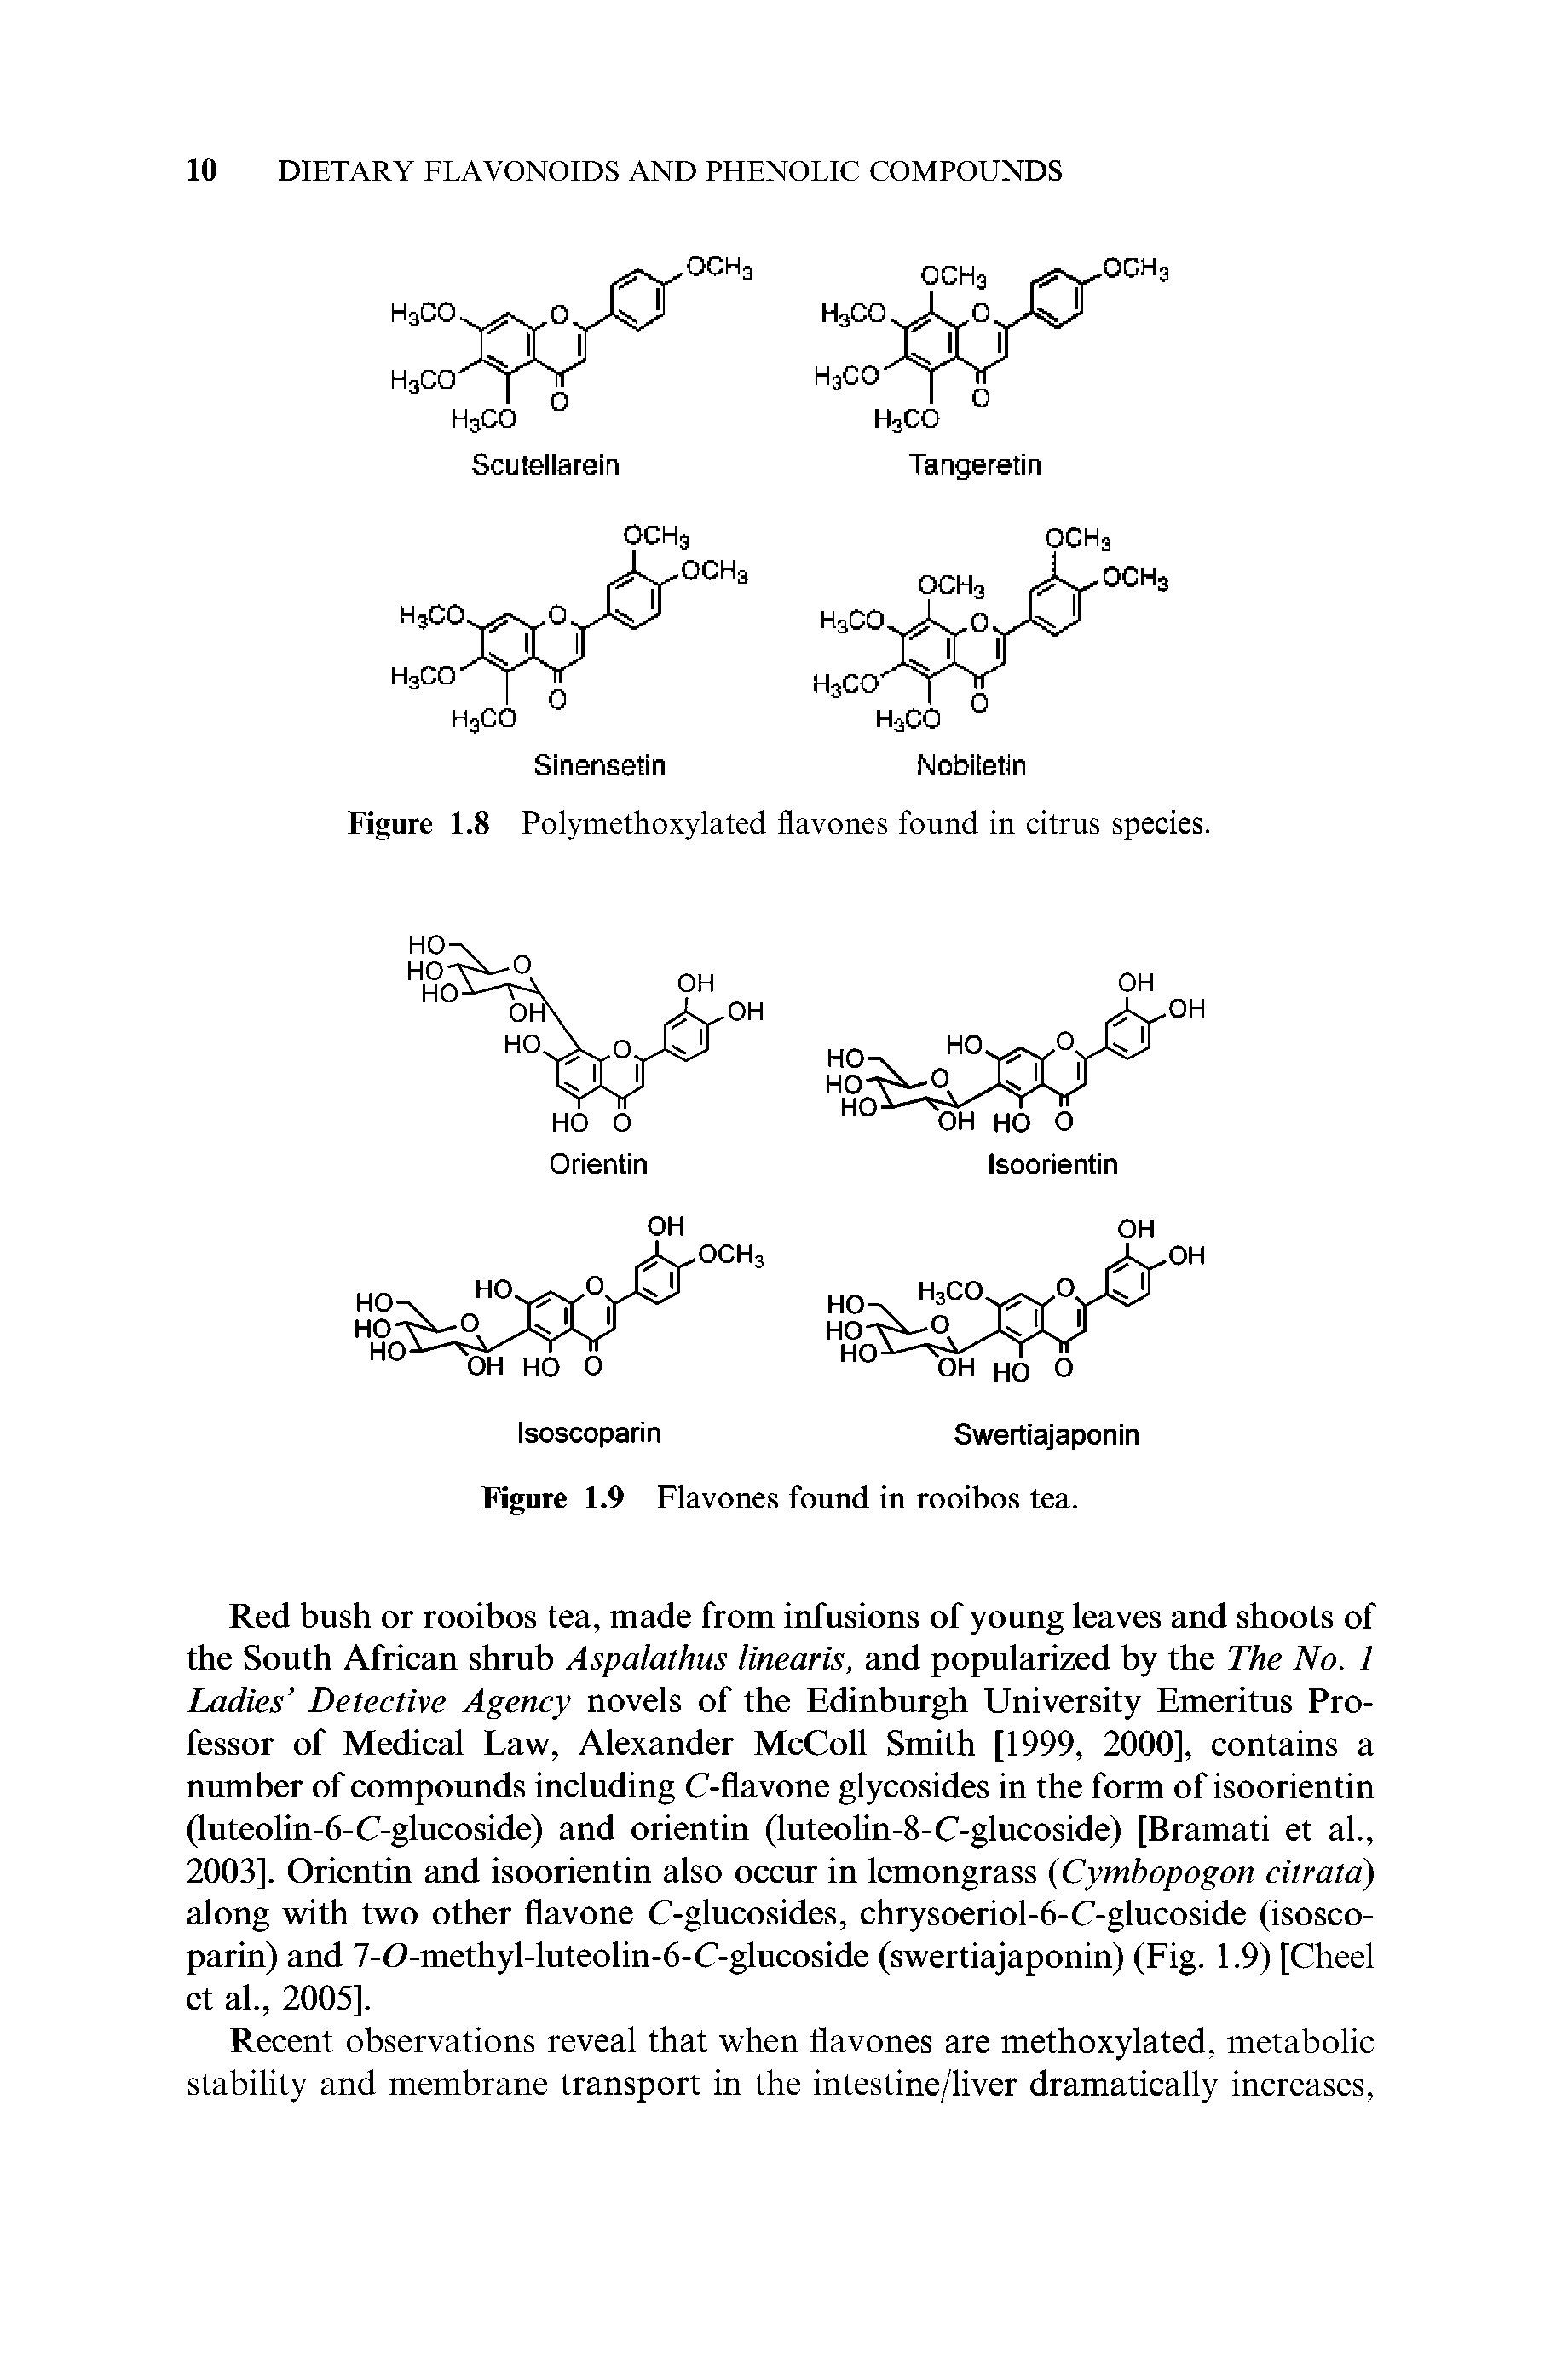 Figure 1.8 Polymethoxylated flavones found in citrus species.